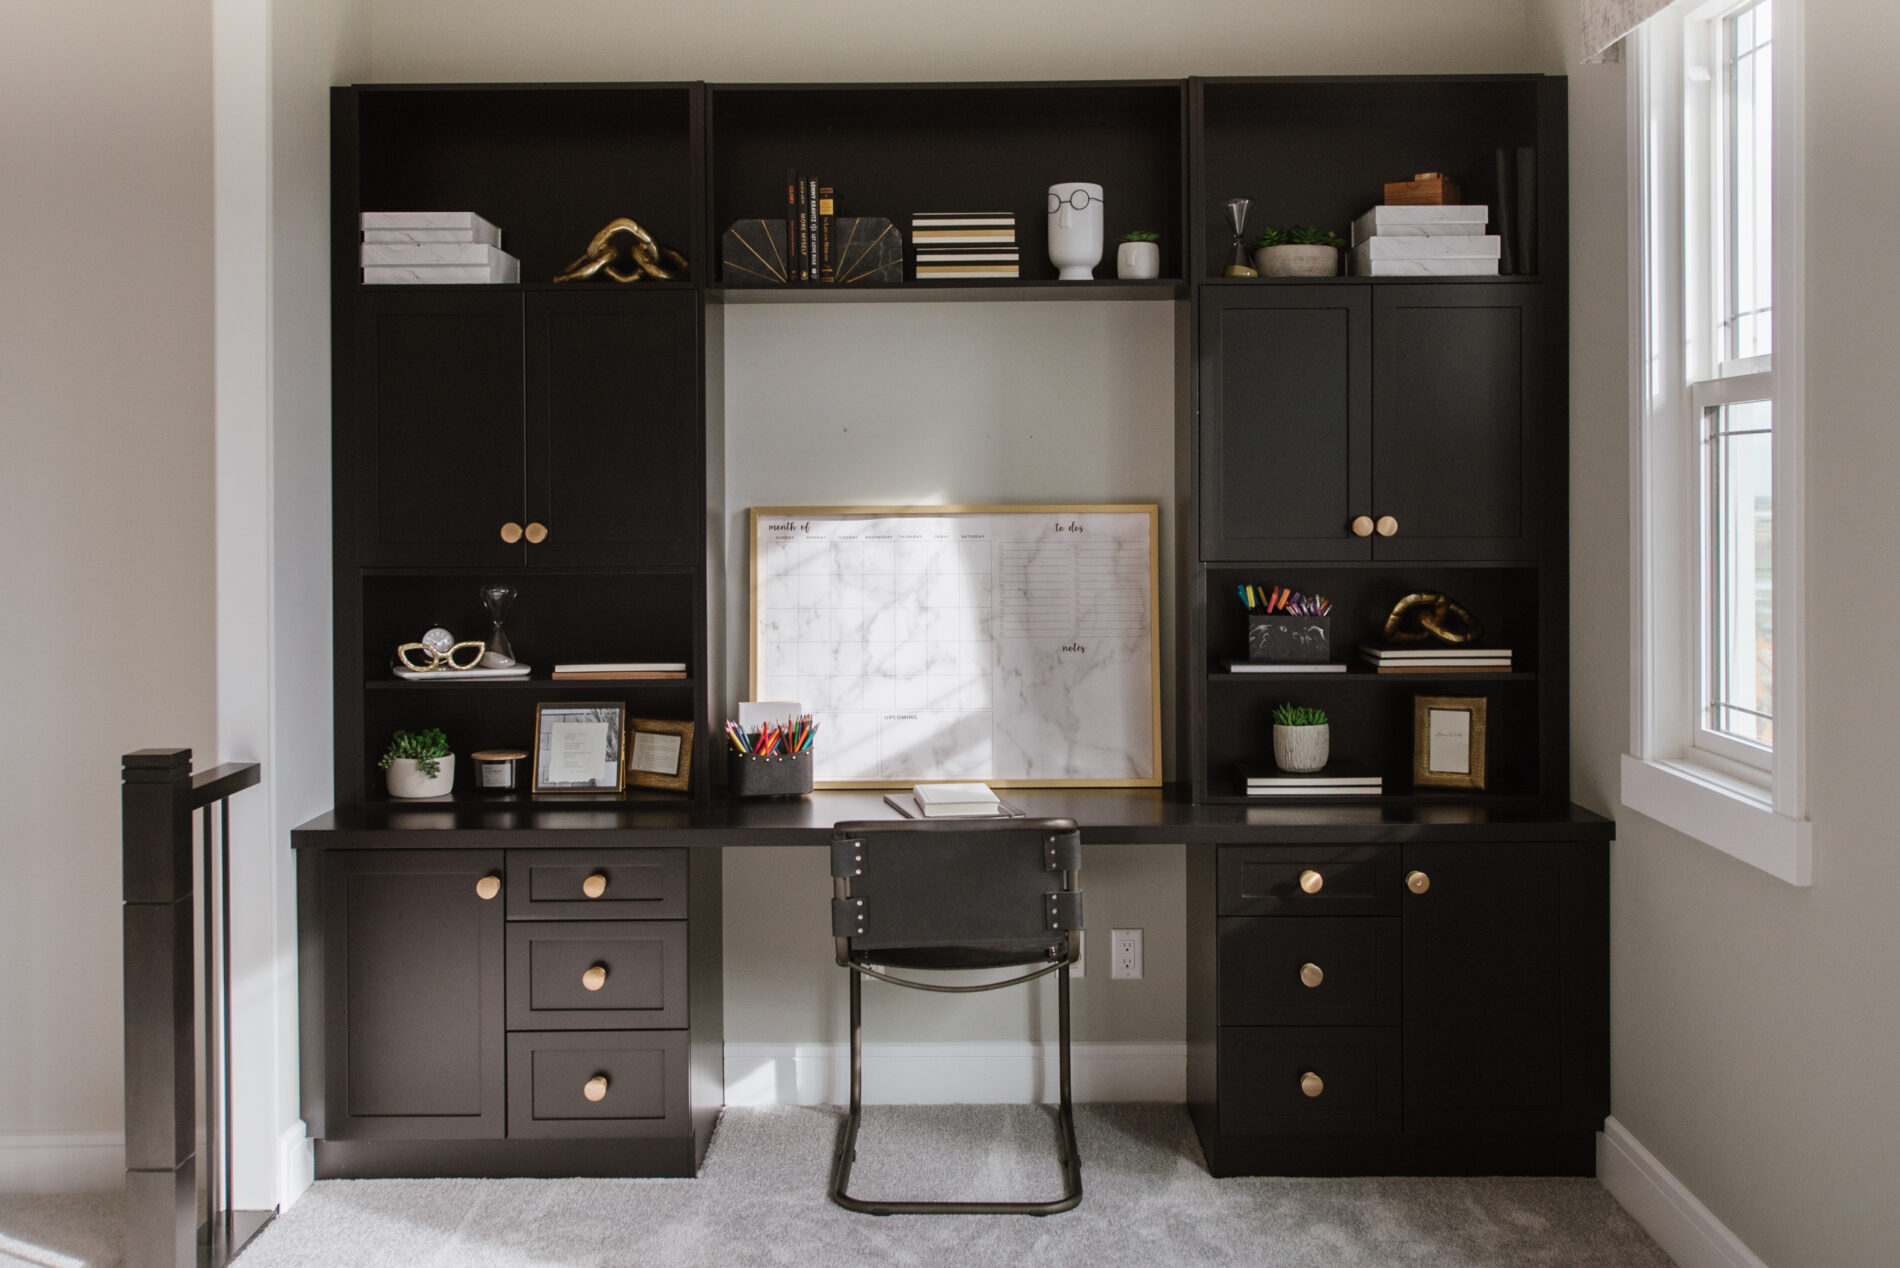 Built in study desk in luxurious black cabinets with large gold cabinet handles, and lots of space to display accessories